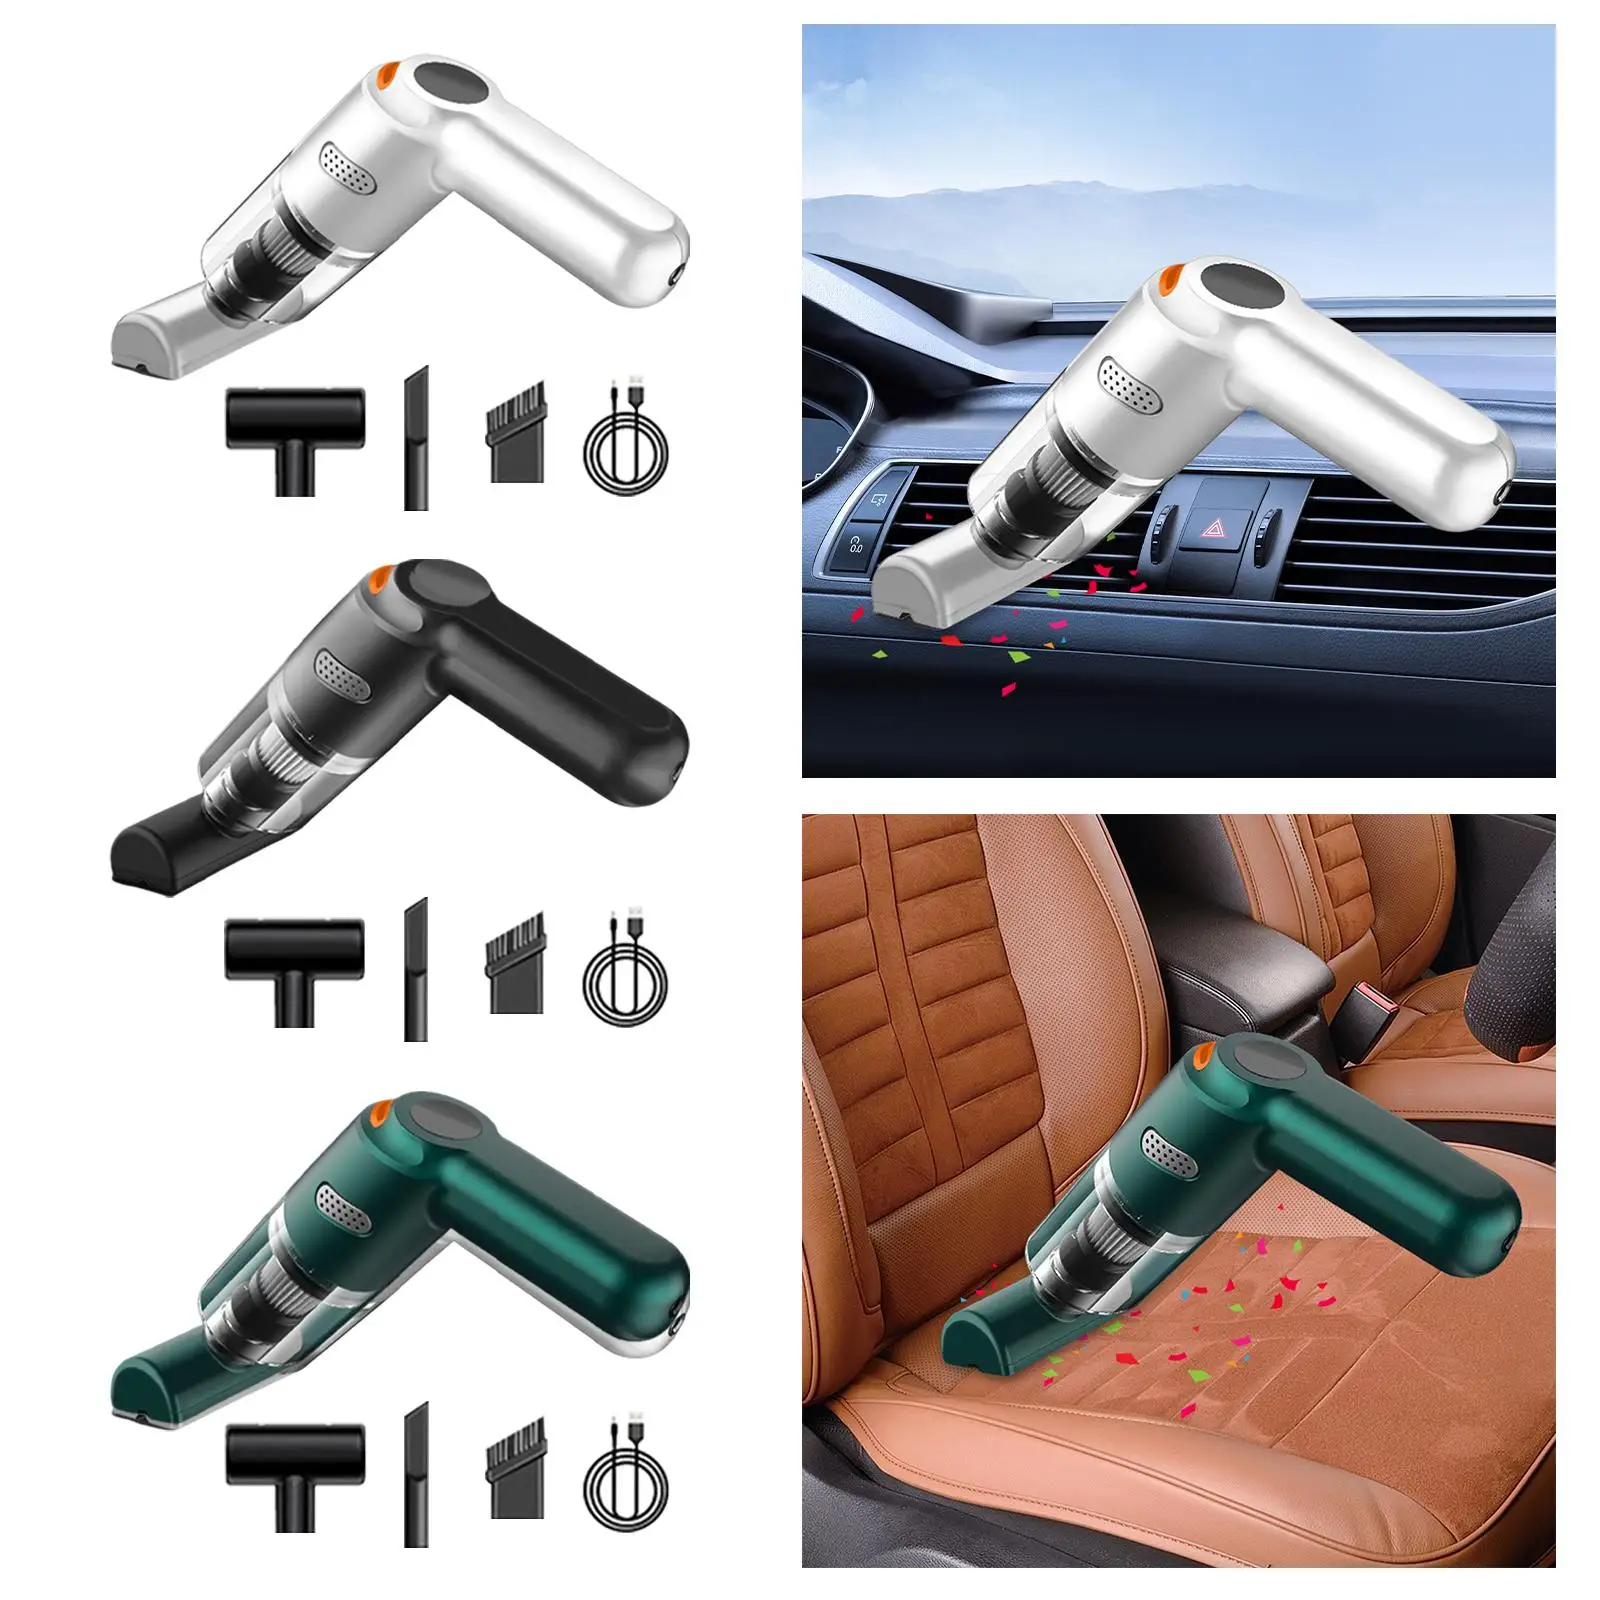 Car Mini Vacuum Cleaner 4000mAh USB Charging Rechargeable Lightweight Handheld Duster 120W 10000PA for car home PC Cleaning